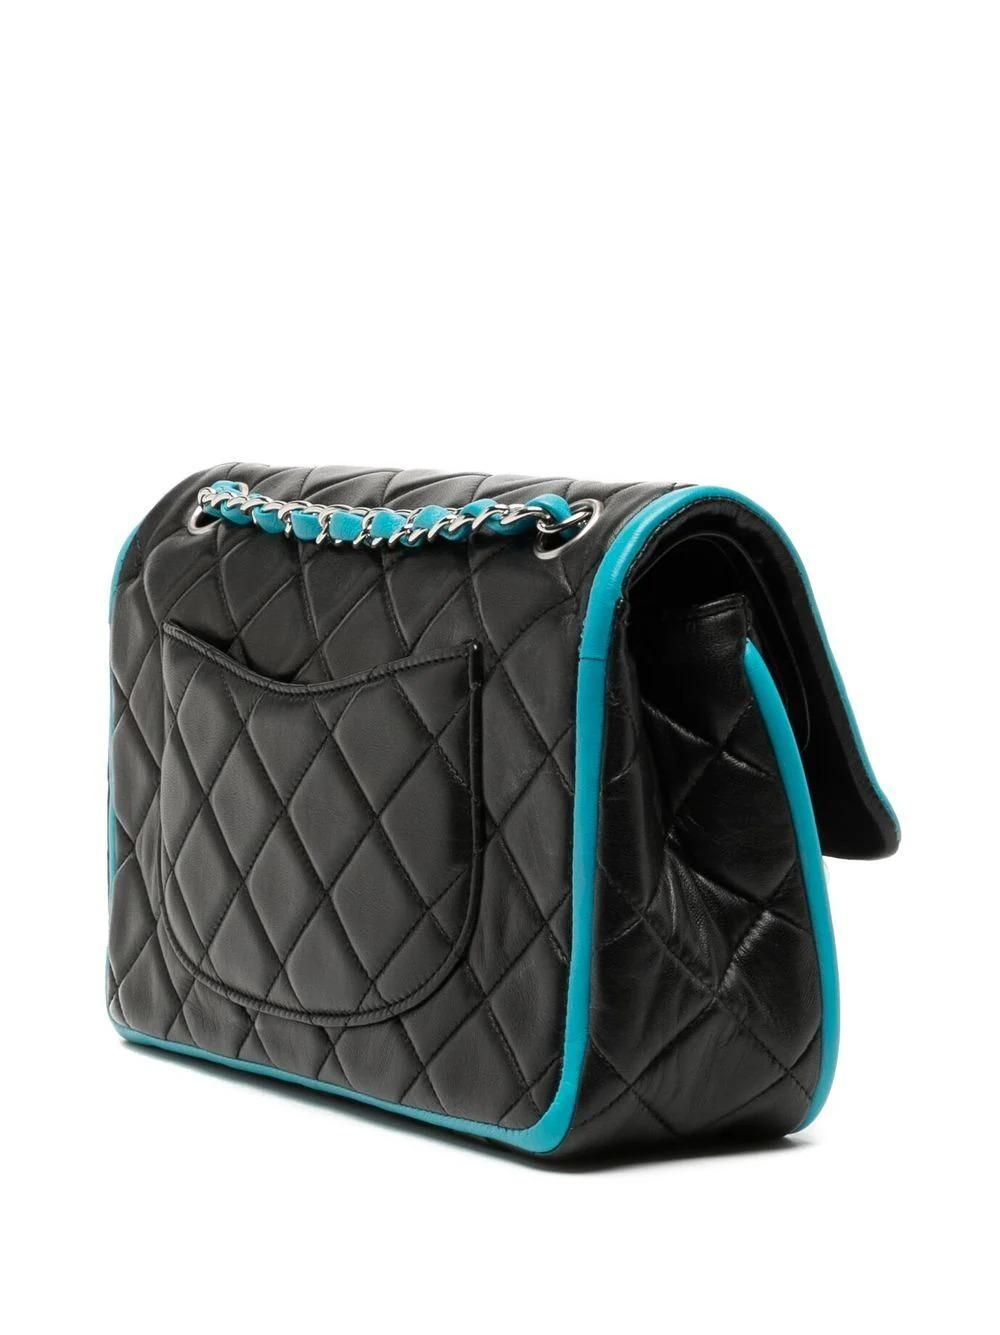 Chanel 2006 Medium Double Classic Flap in Black Lambskin Turquoise Piping Bag 7